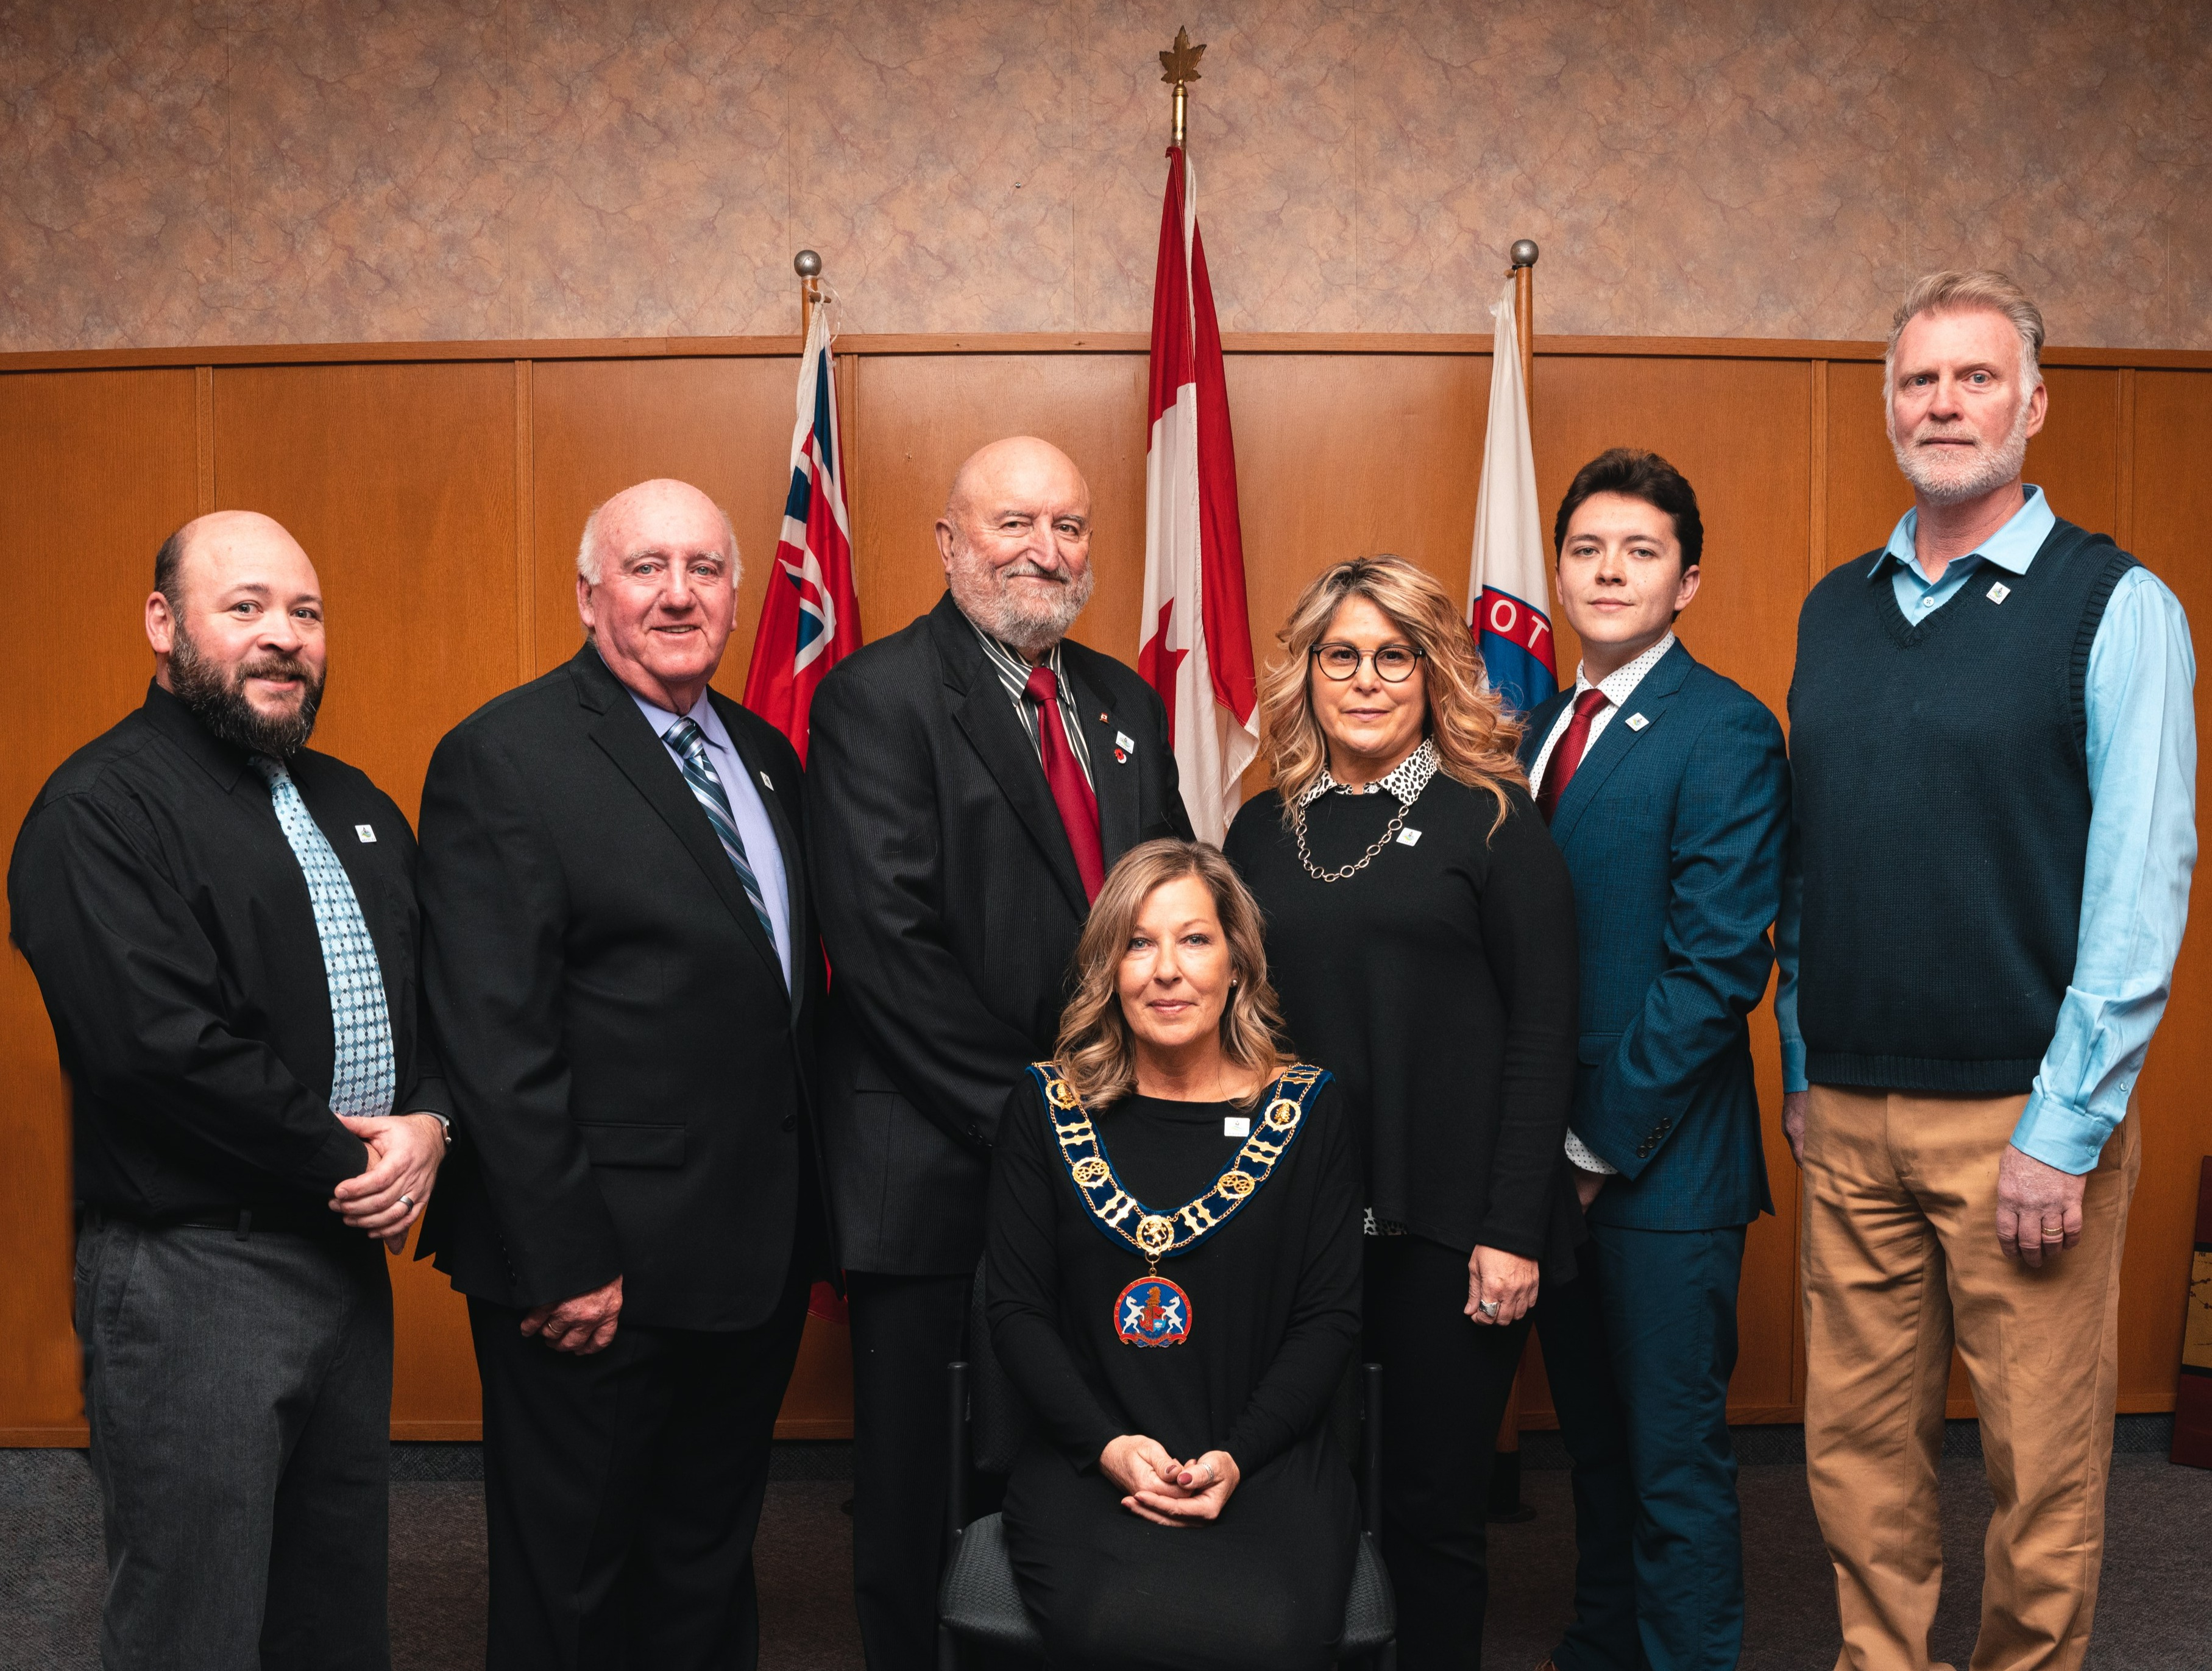 Your 2022 to 2026 Members of Council (from left to right): Councillor Chris Couper, Councillor Tom Burnette, County Councillor Dan Lynch, Mayor Lisa McGee (seated), Councillor Lynn Grinstead, Councillor Billy Denault, Councillor Chris Toner